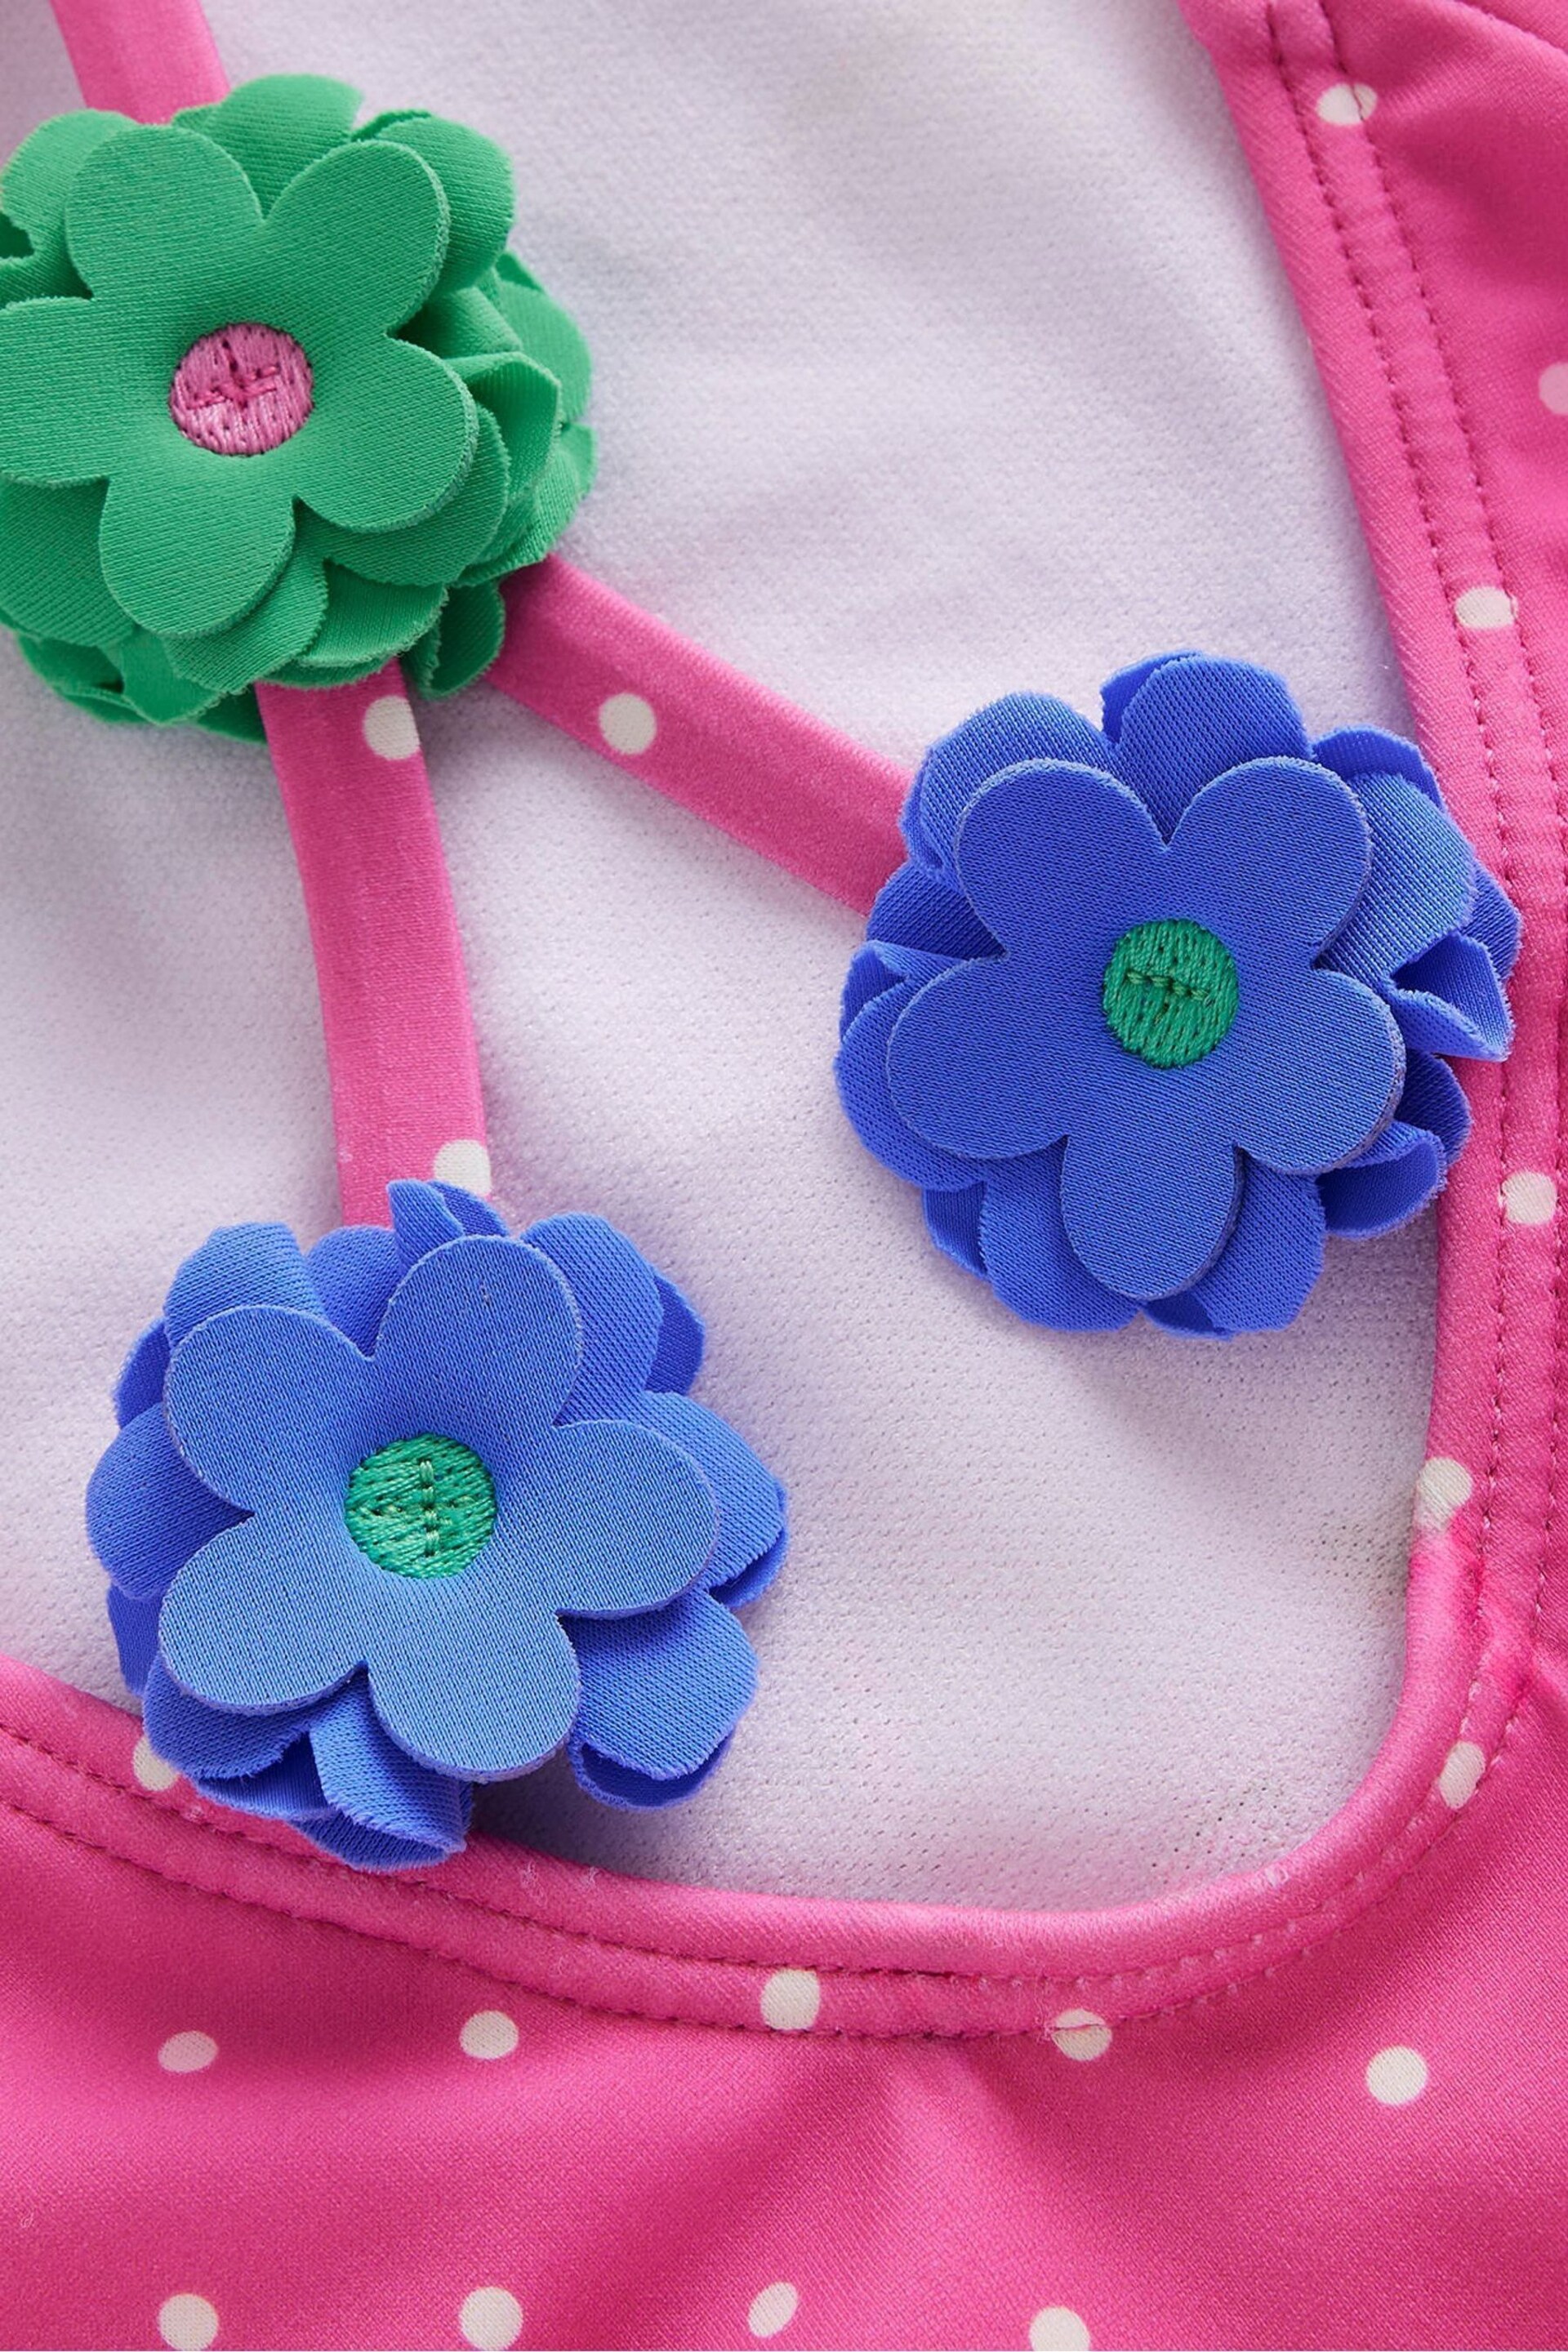 Boden Pink Fun Appliqué Swimsuit - Image 3 of 4